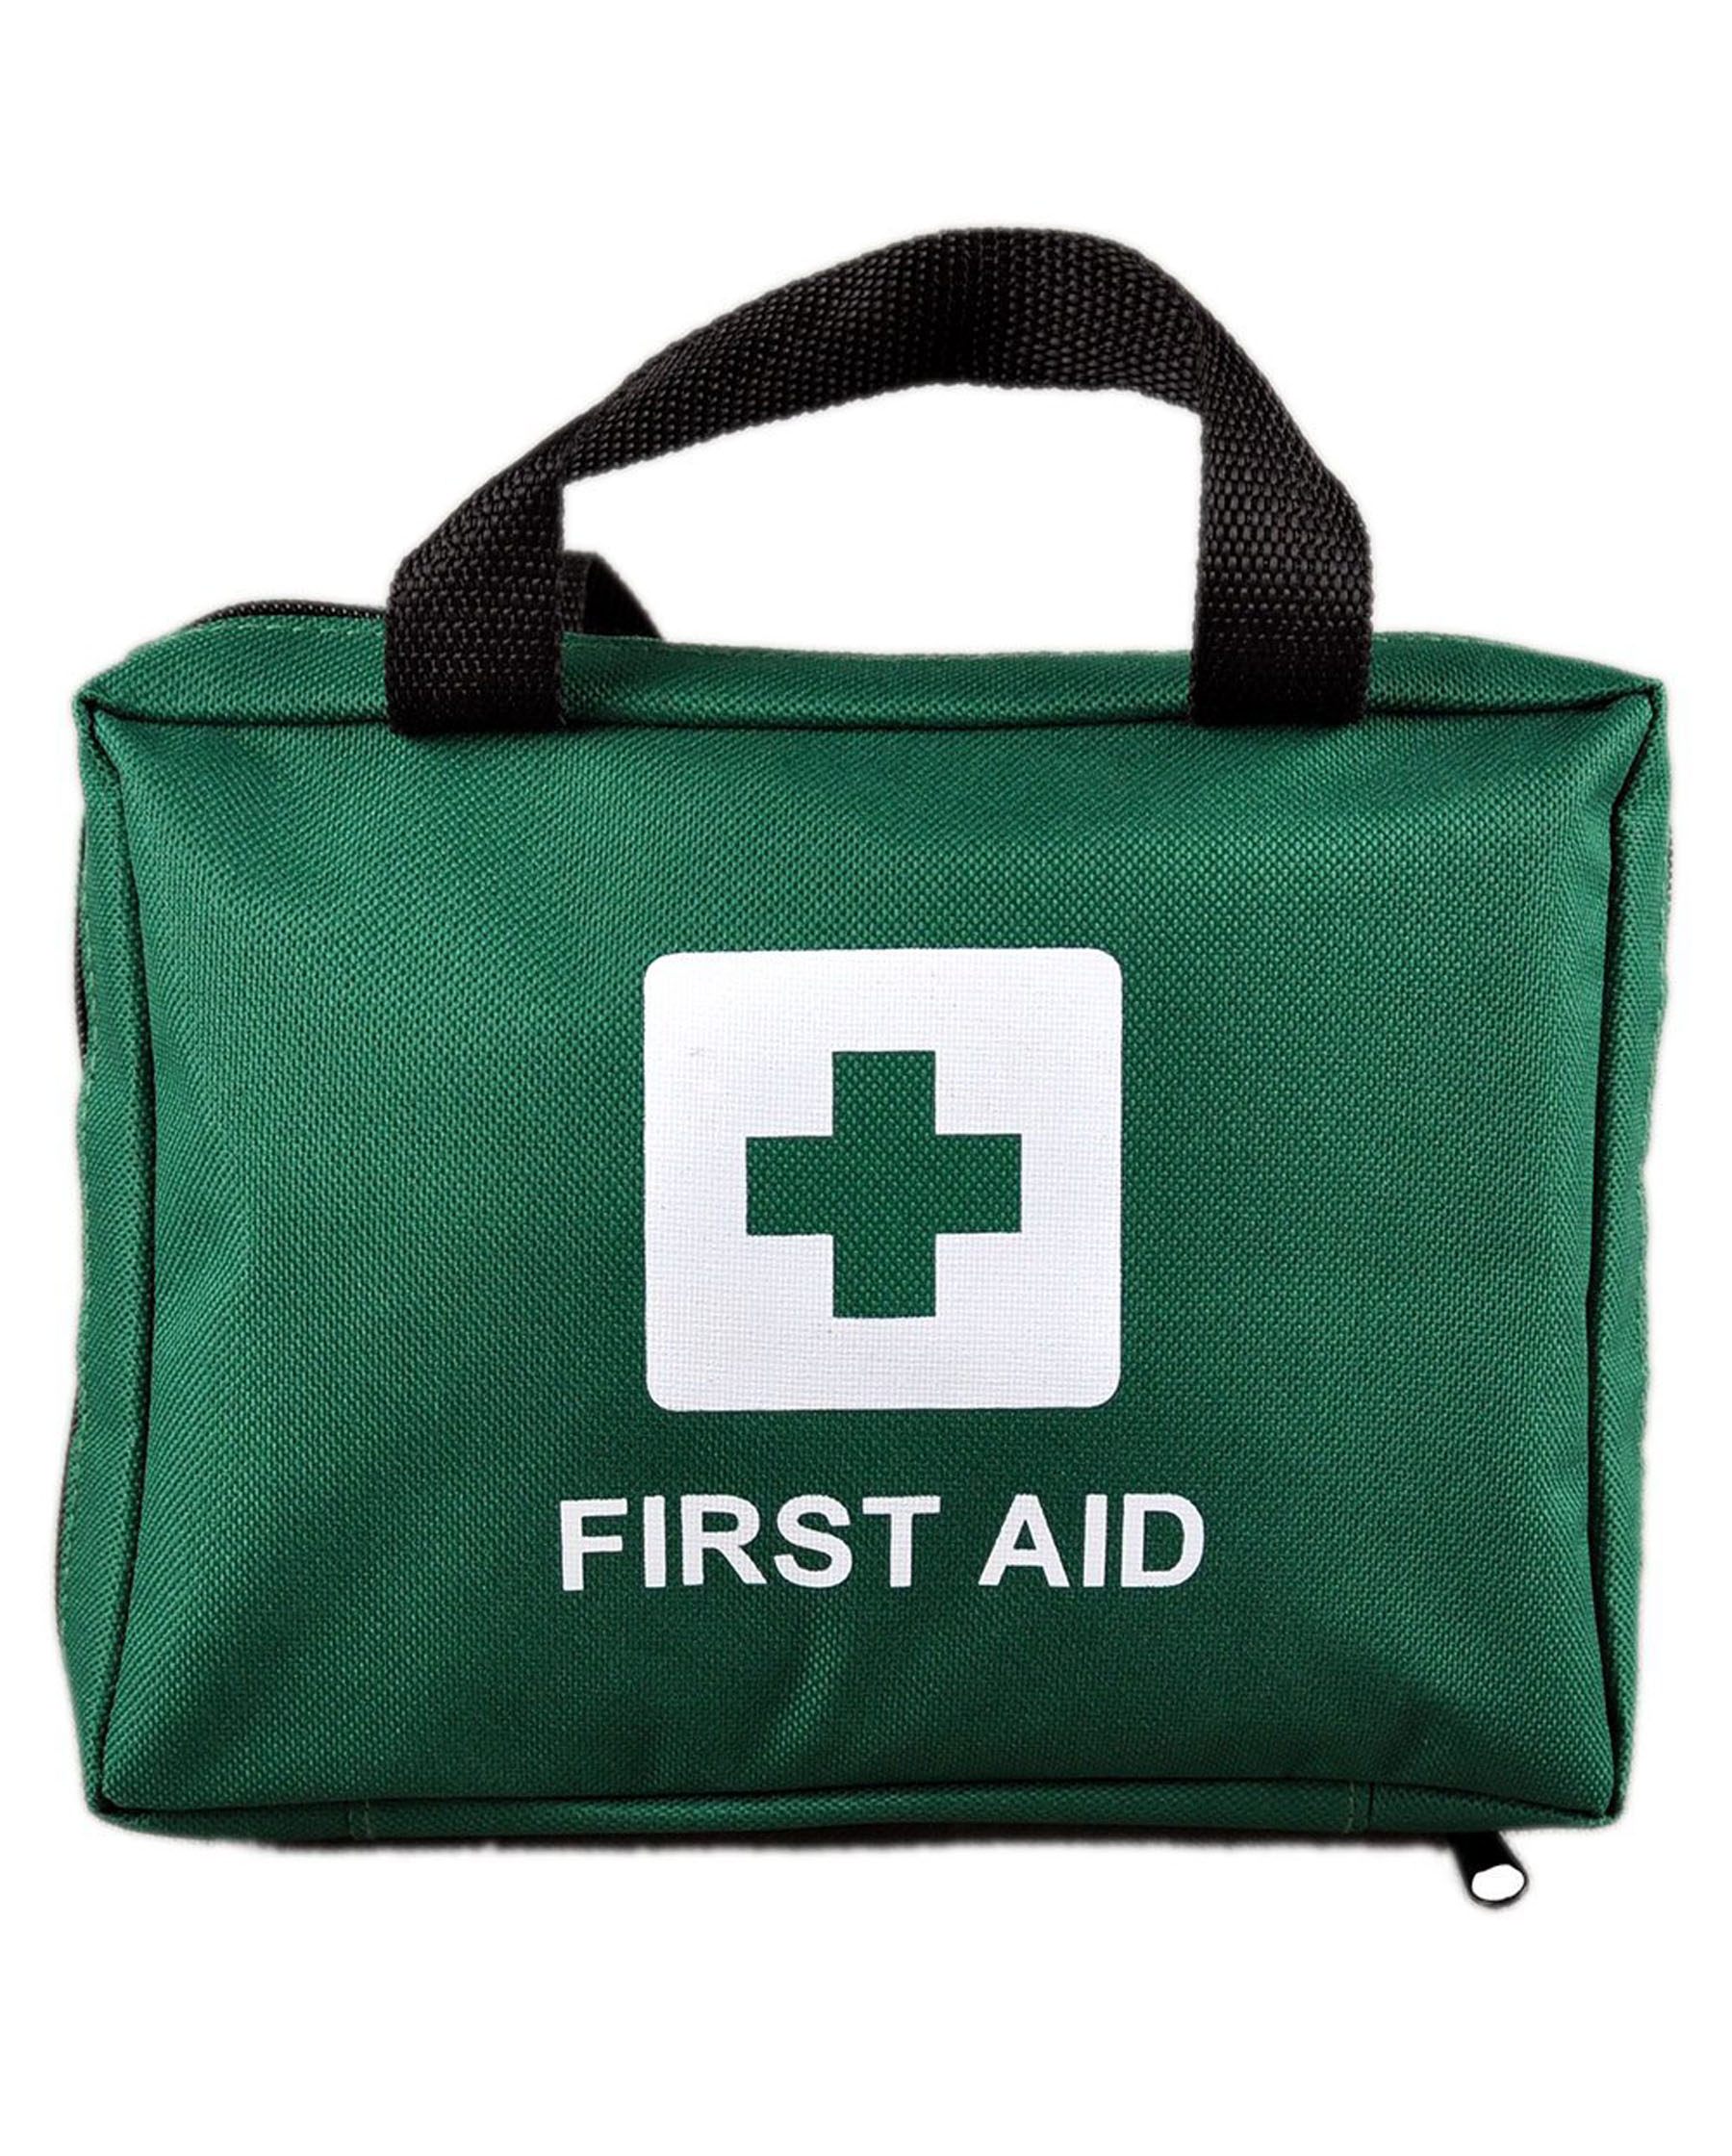 first aid kit - photo #18